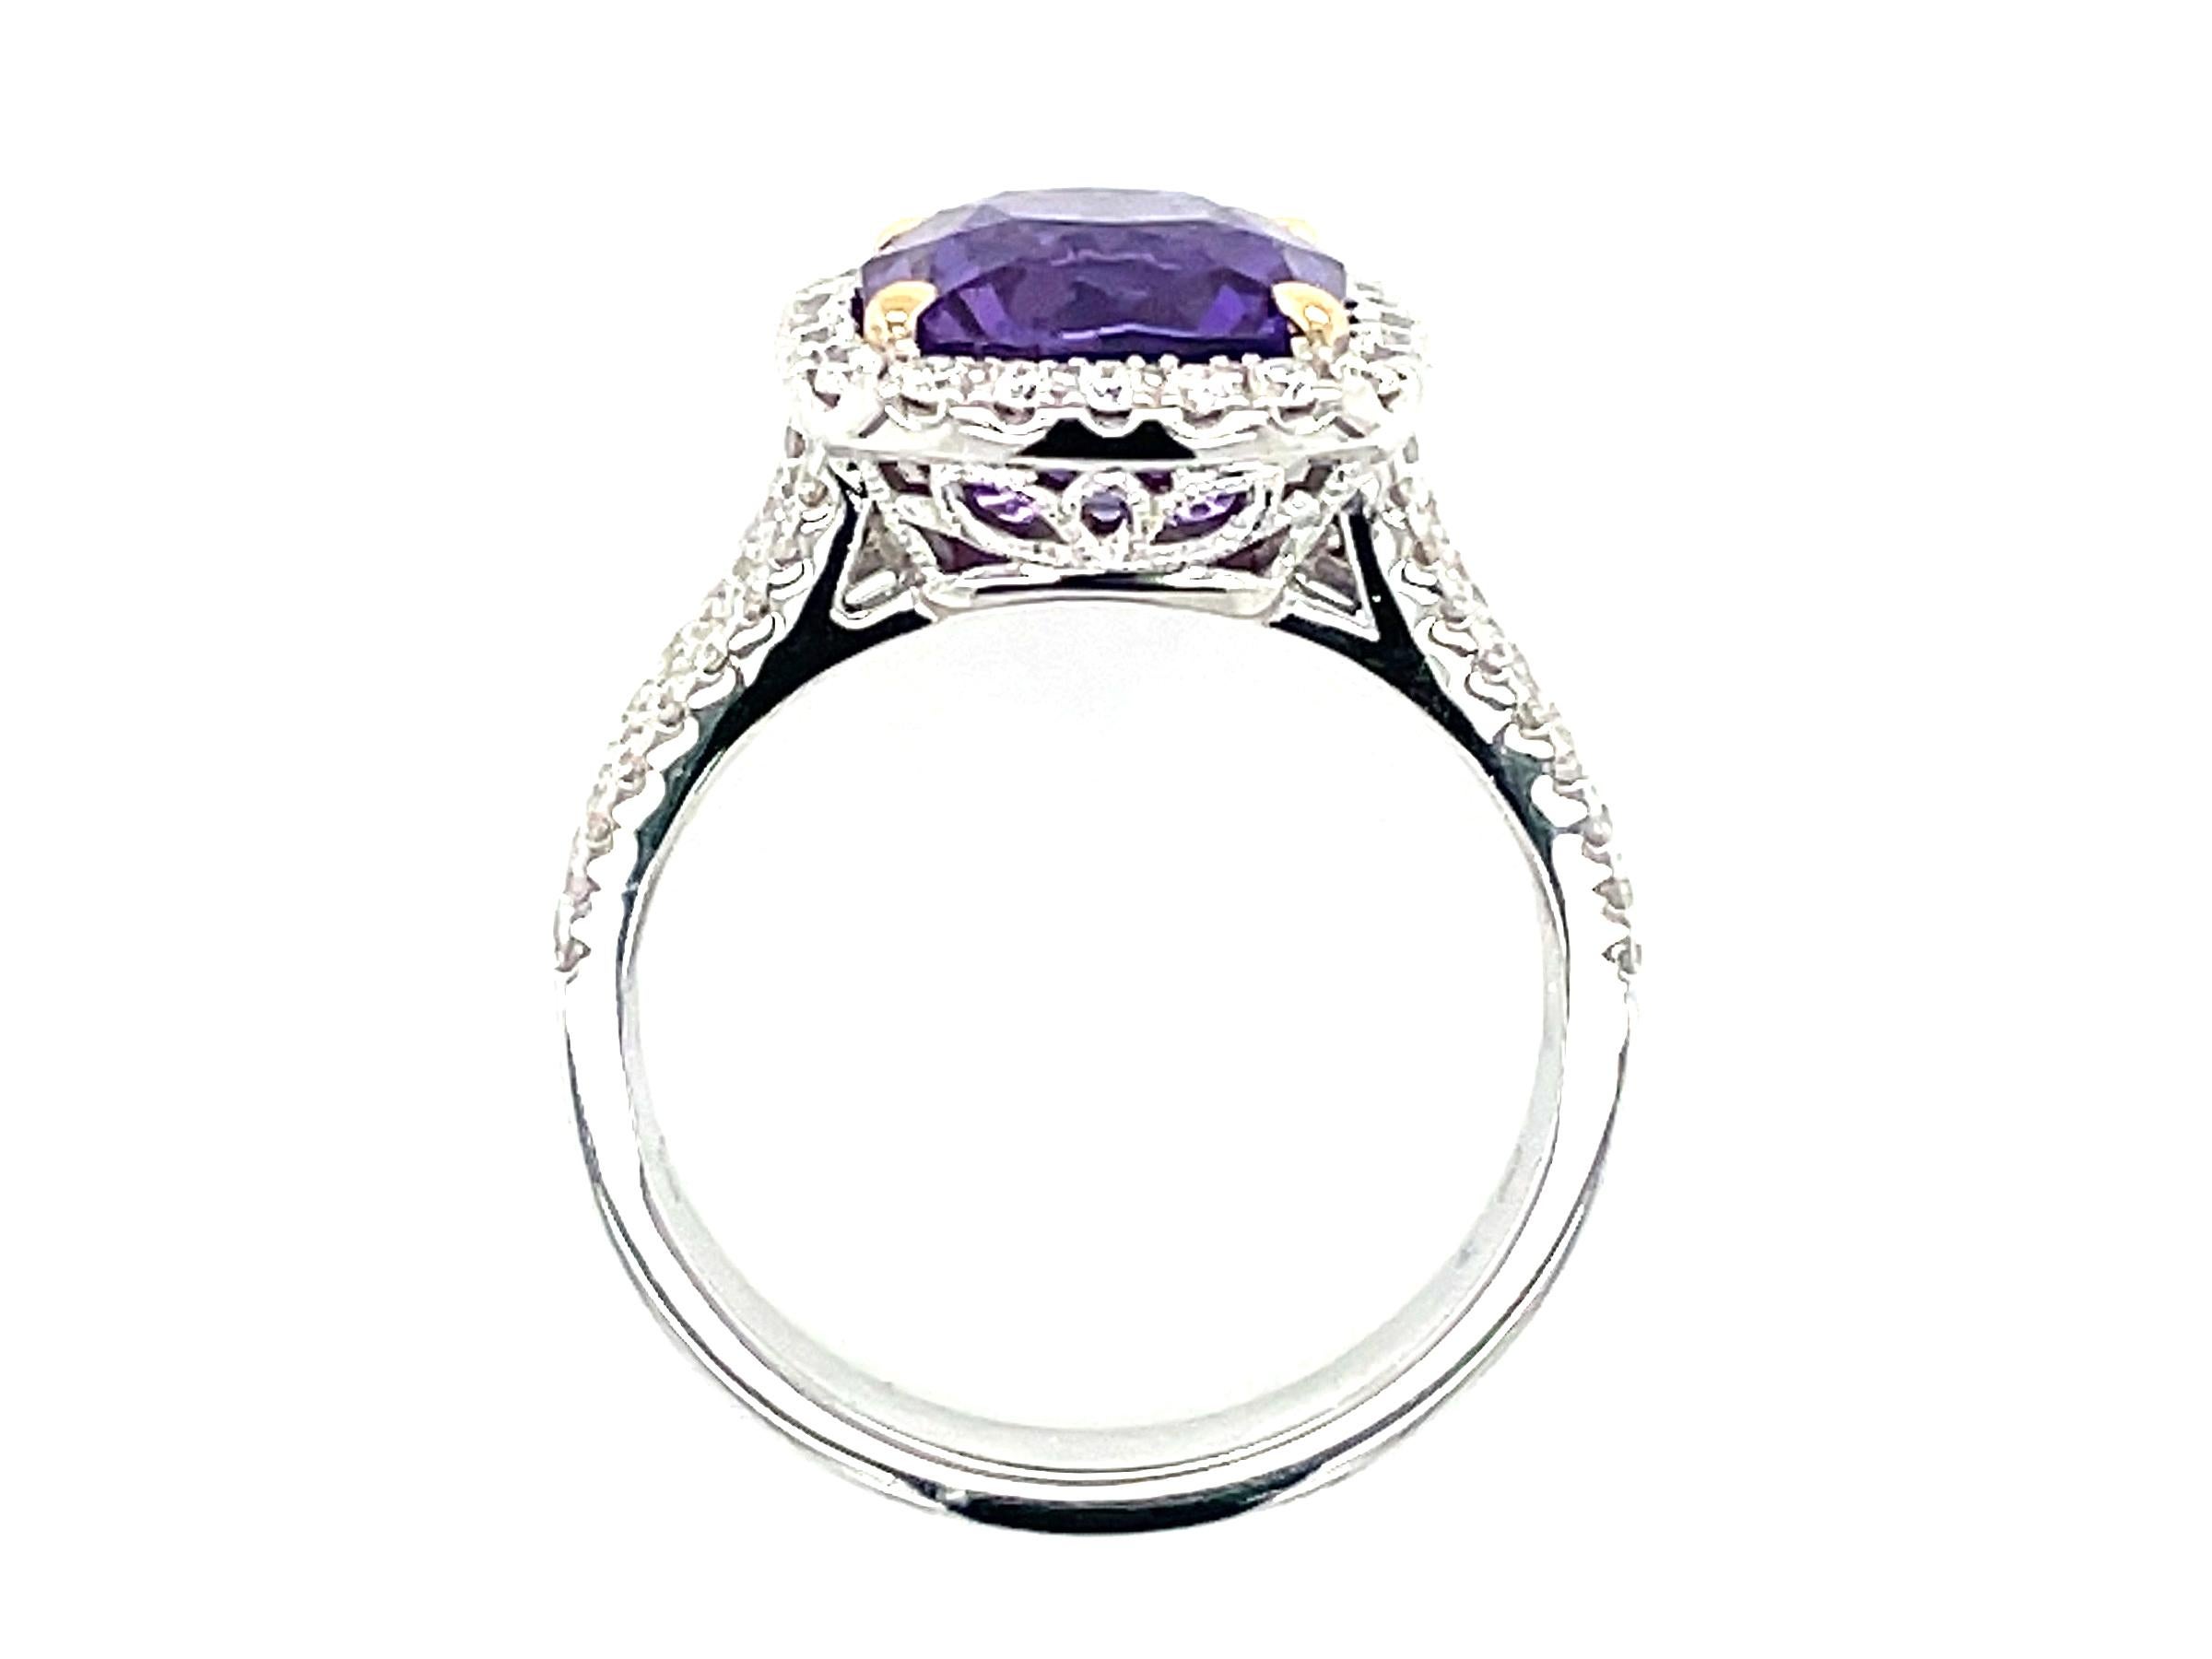 GAL Certified Natural No Heat 4.59 Carat Purple Sapphire and Diamond Ring In New Condition For Sale In Great Neck, NY